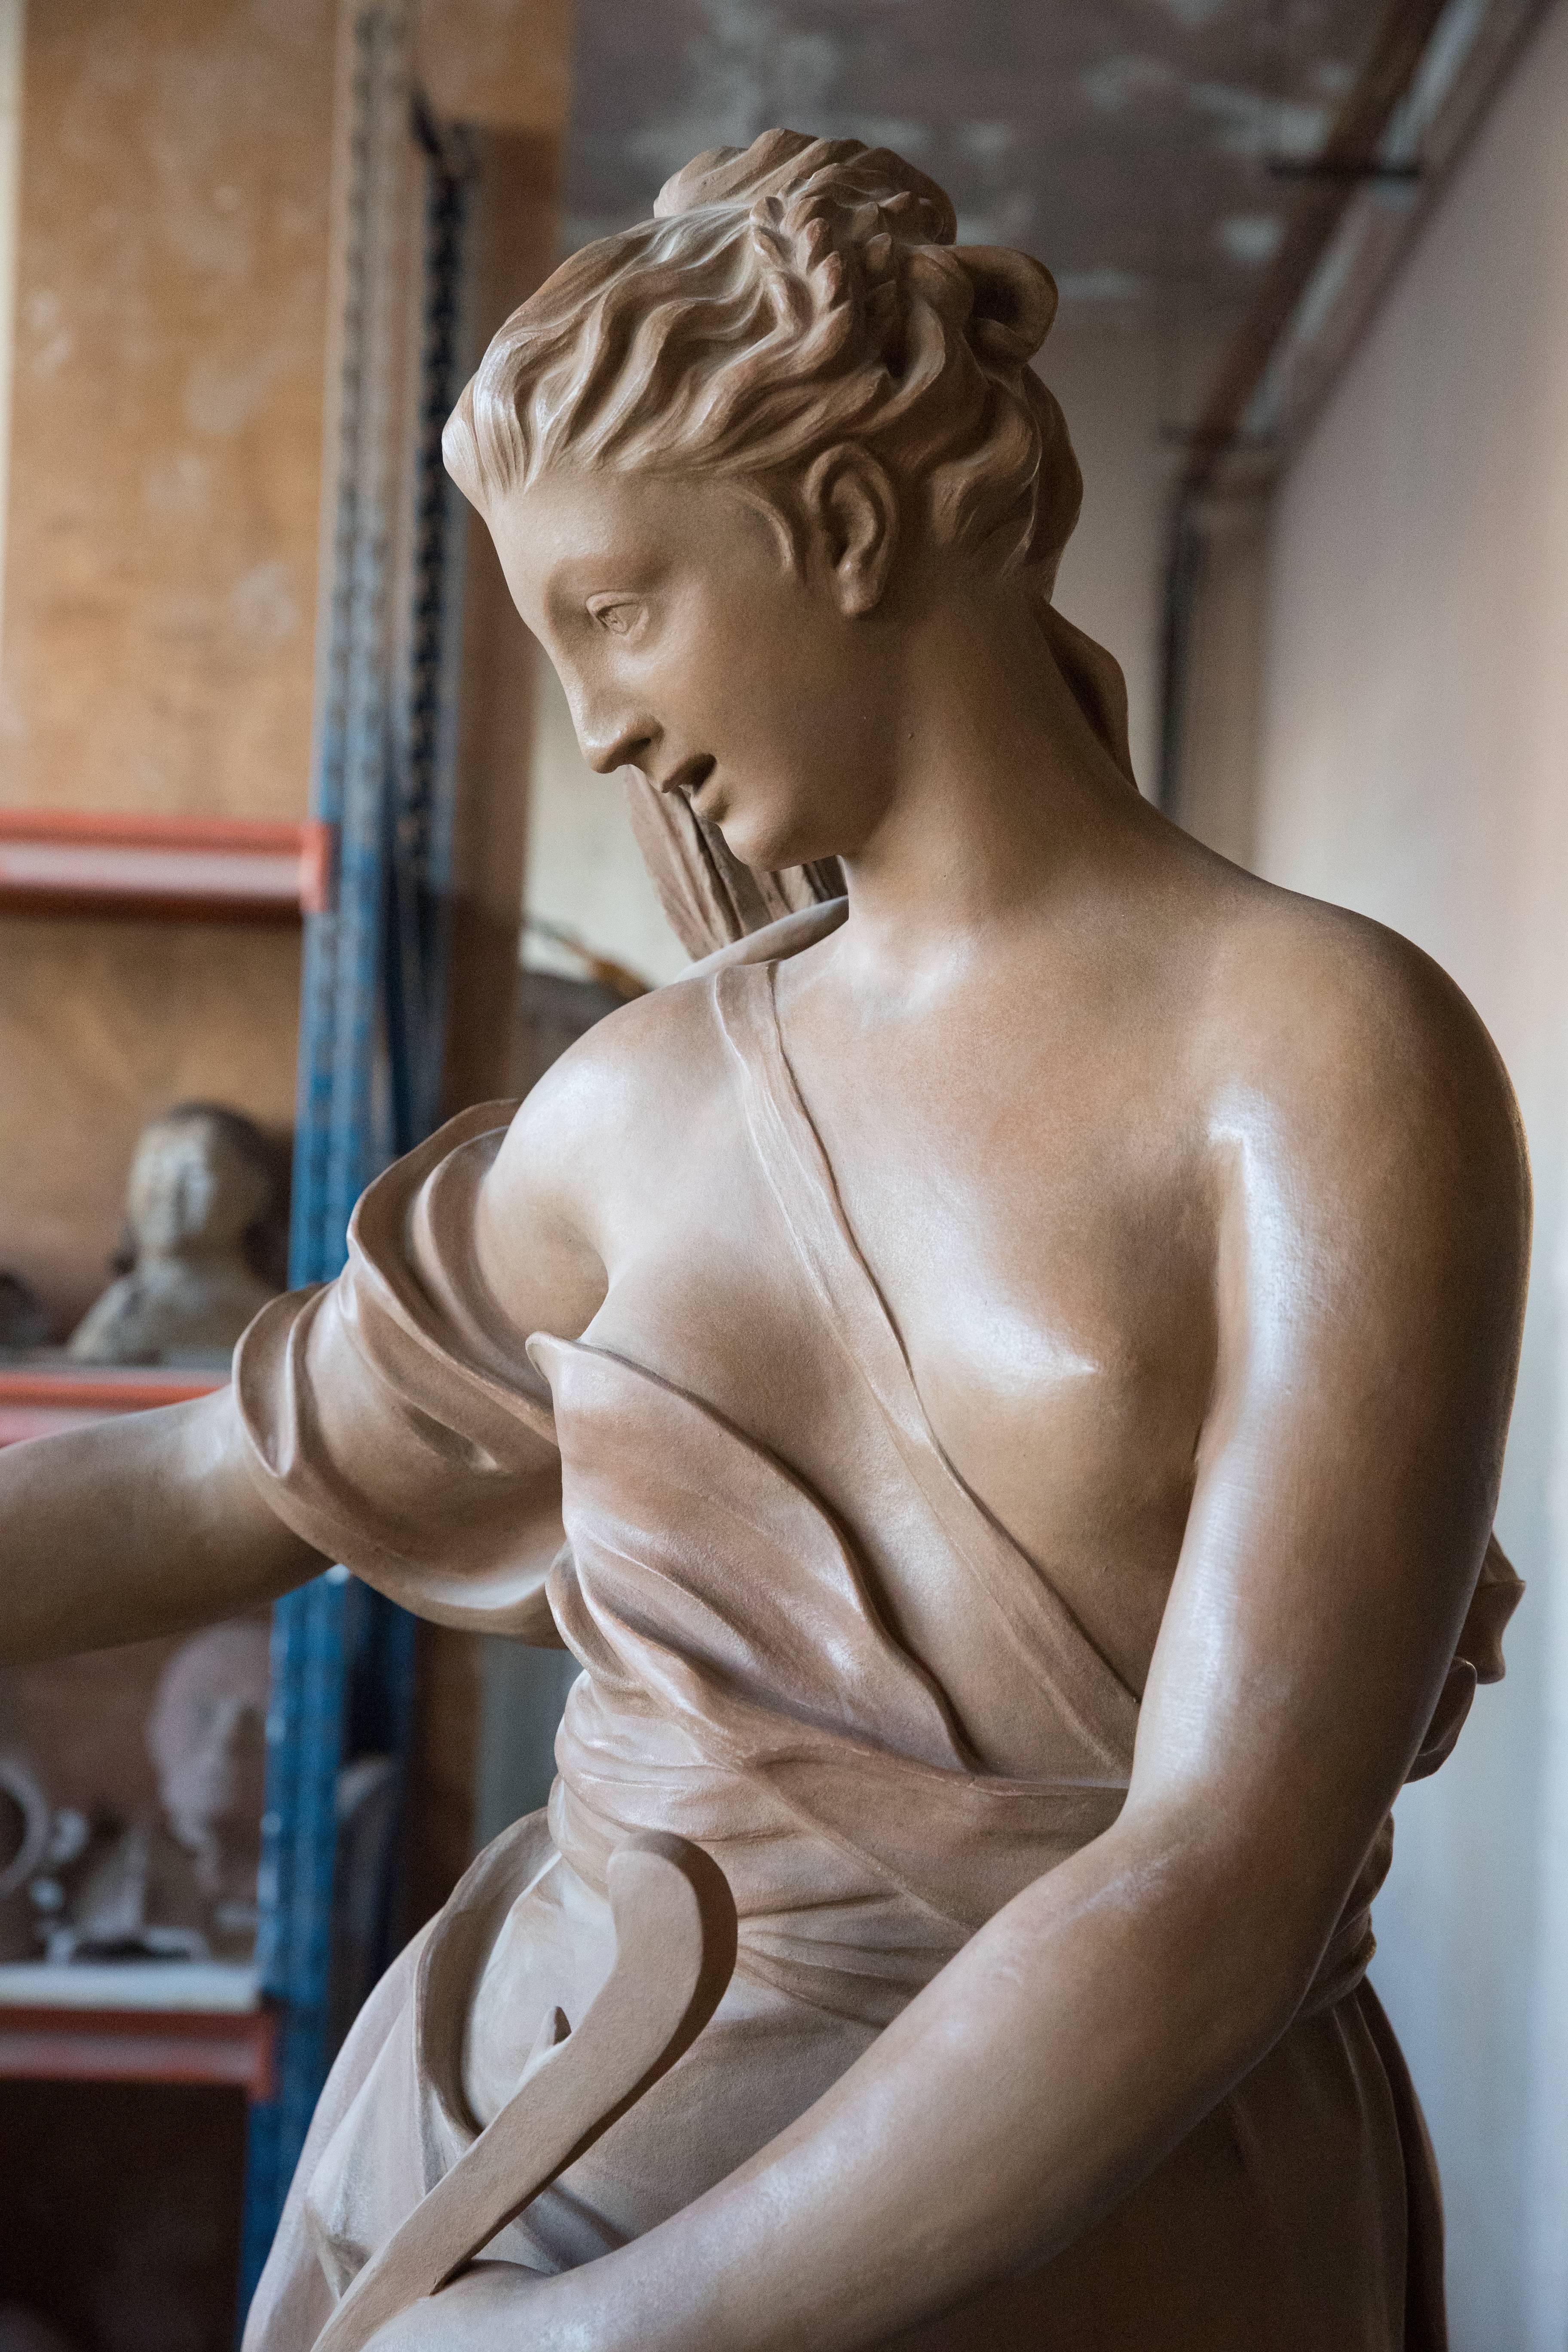 Art reproduction in terracotta, Compagne de Diane after René Frémin.
Rene´ Fre´min (1672-1744) 167 x 85 x 75 cm. Base: 52 x 52 cm, Louvre.
Although dated 1717, this statue of a hunting nymph was ordered during Louis XIV’s lifetime. It is part of a